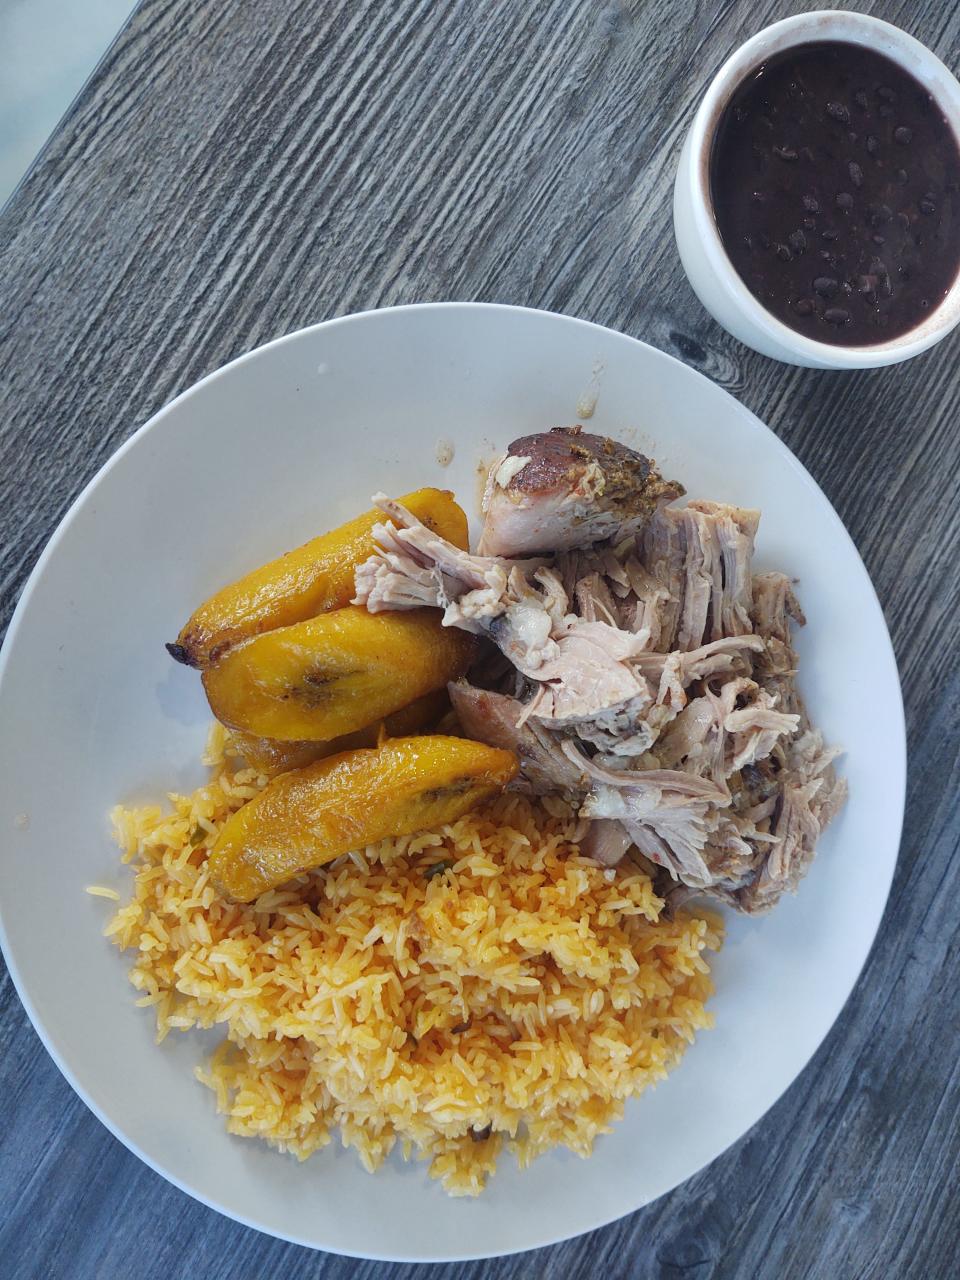 The Latin Melting Pot in Vero Beach serves succulent pork with rice and plantains on the side.